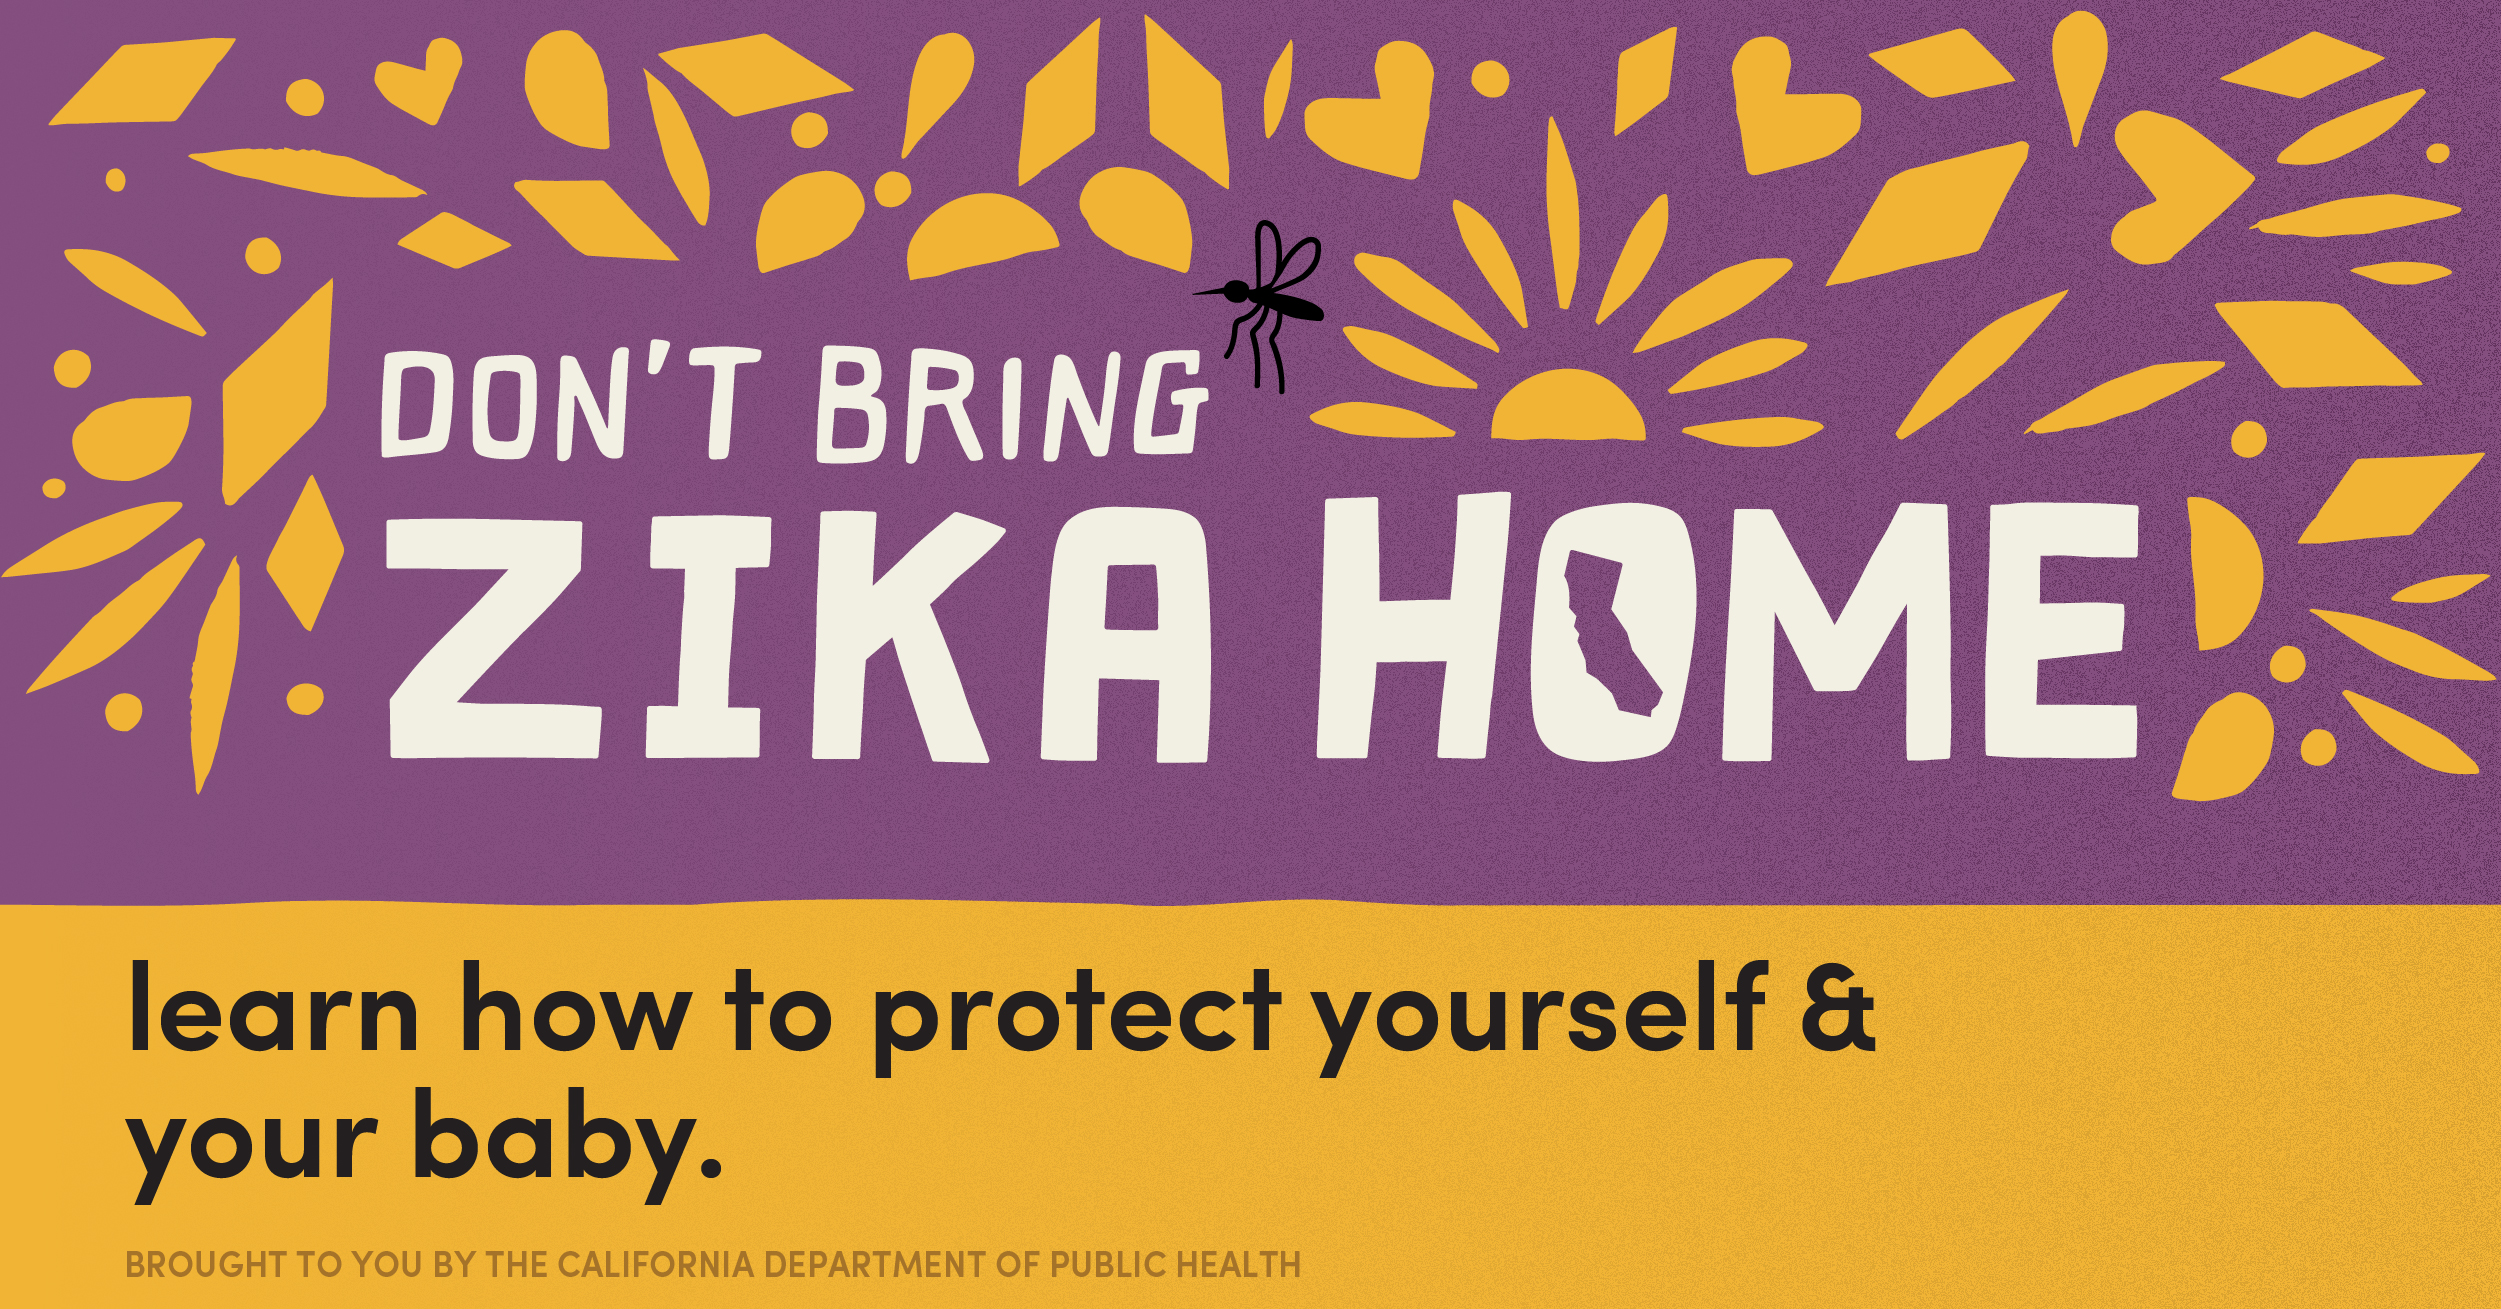 Don't bring Zika home - learn how to protect yourself and your baby.